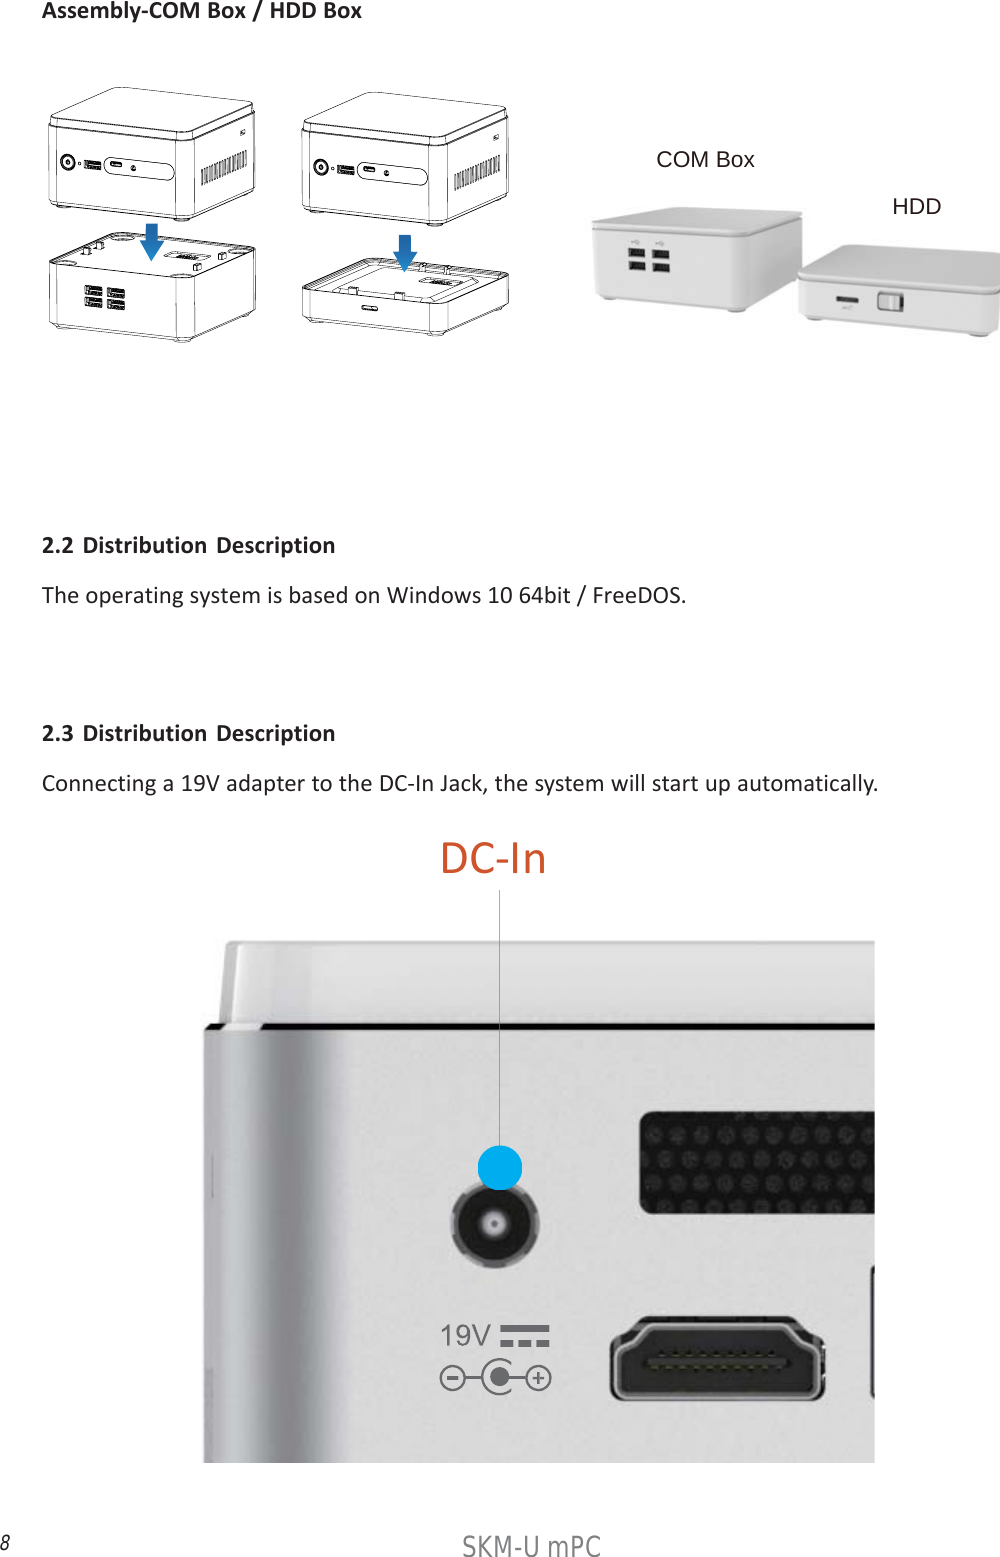 8SKM-U mPC2.2 Distribution DescriptionThe operating system is based on Windows 10 64bit / FreeDOS.2.3 Distribution DescriptionConnecting a 19V adapter to the DC-In Jack, the system will start up automatically.DC-InAssembly-COM Box / HDD BoxCOM BoxHDD